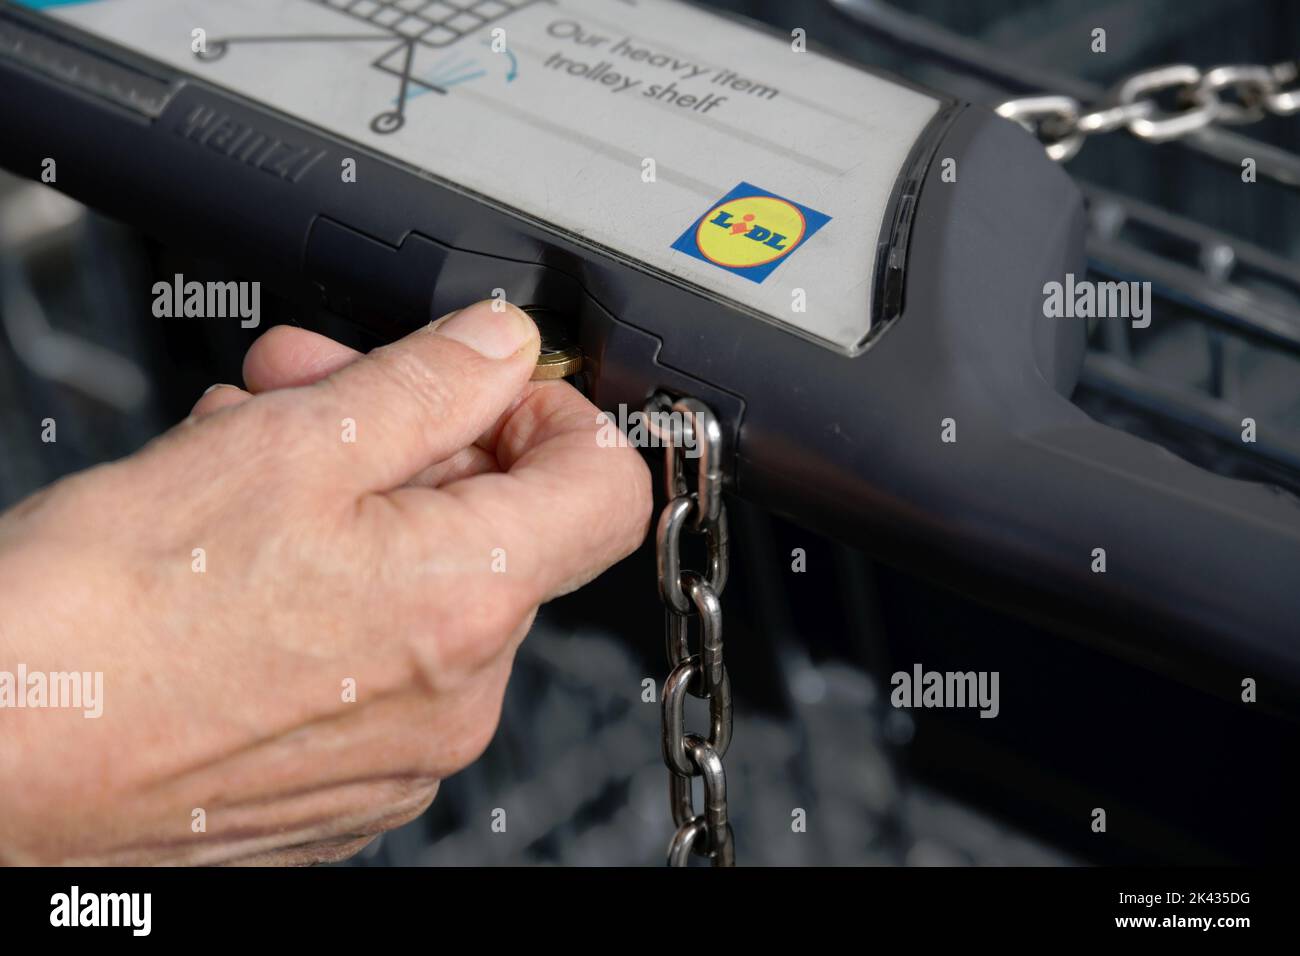 Inserting coin in shopping trolley to unlock so it can be used. Part of trolley theft protection. Stock Photo